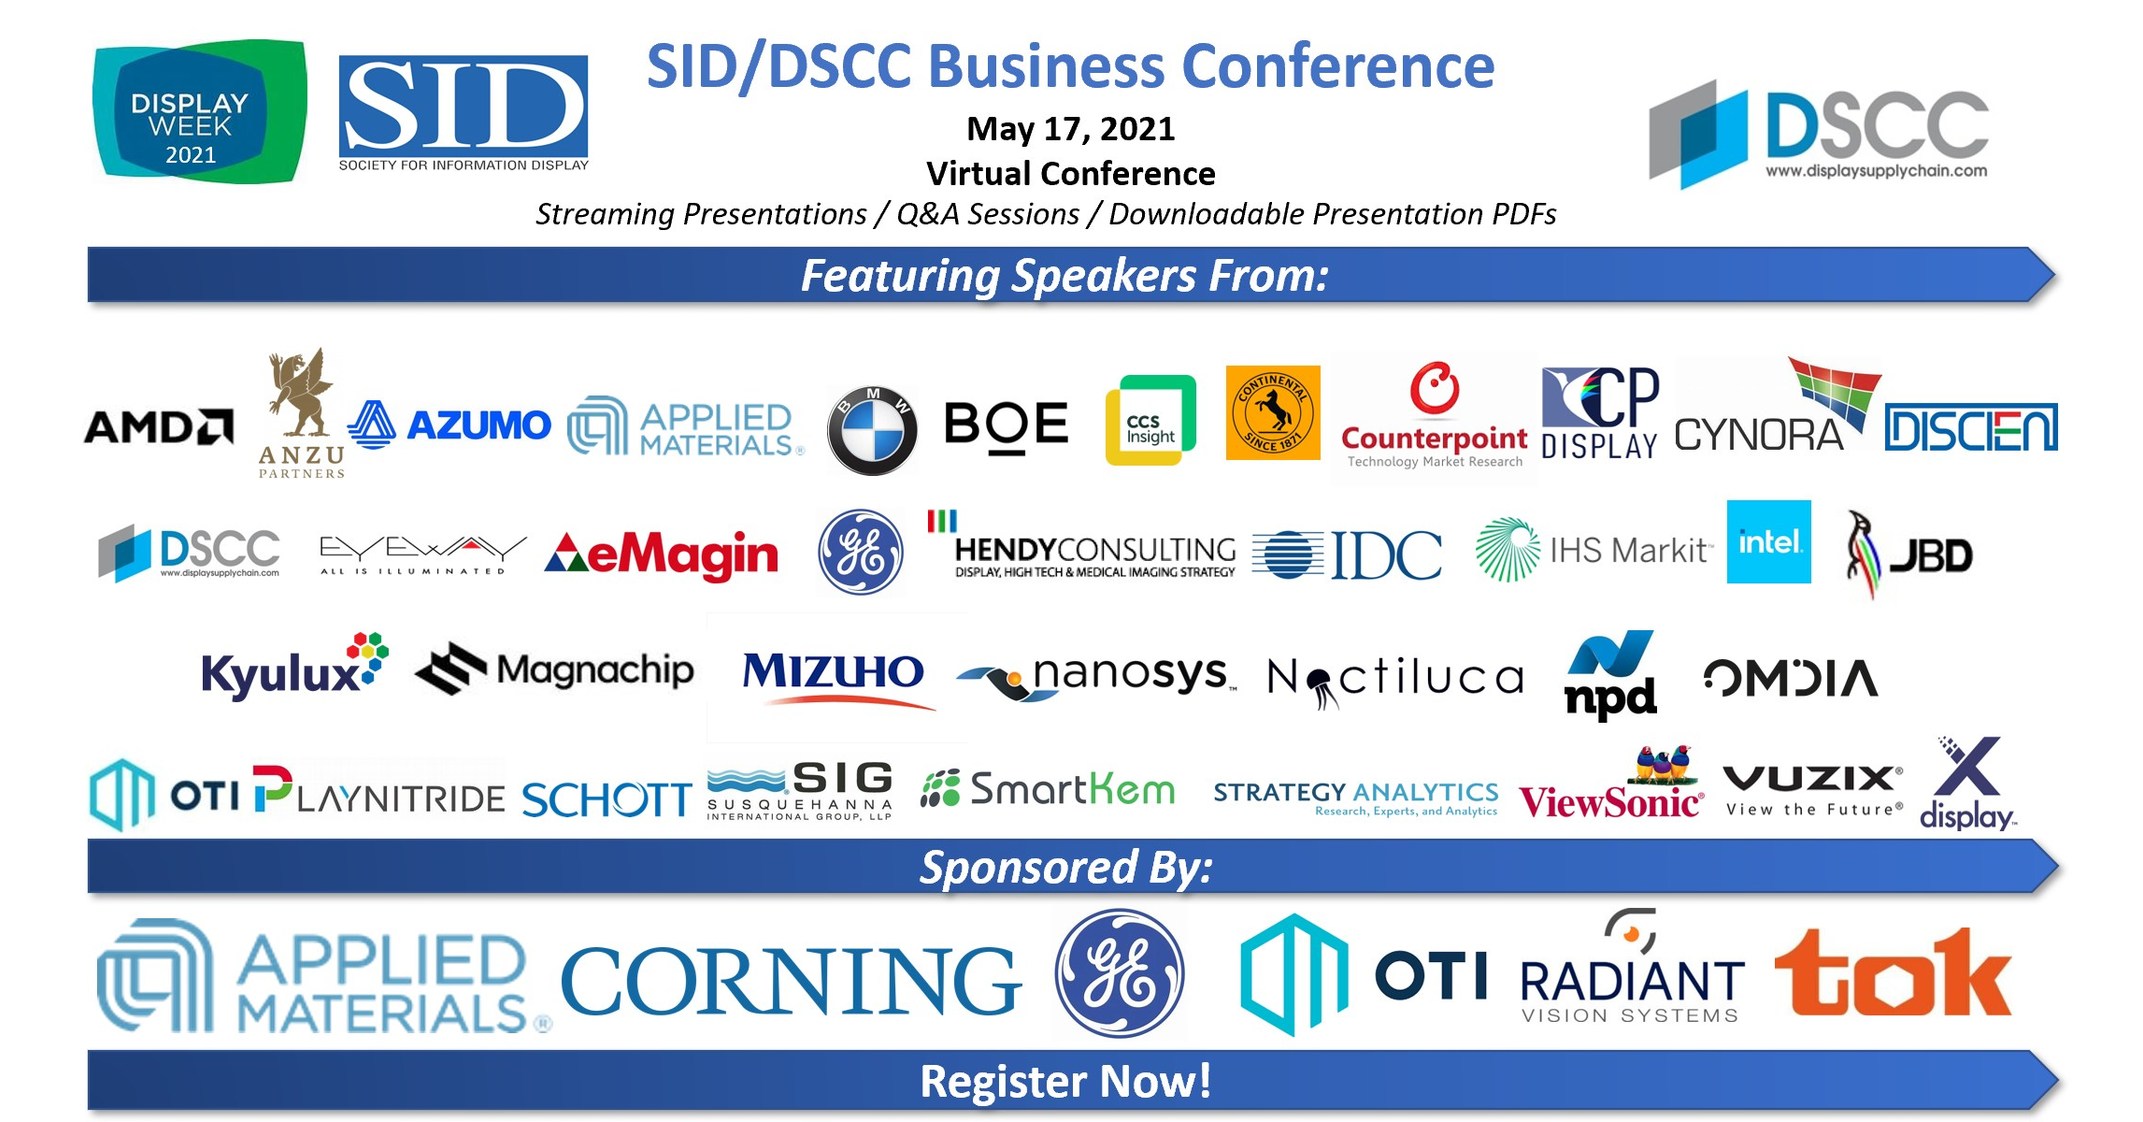 SID Business Conference Set to Launch on May 17